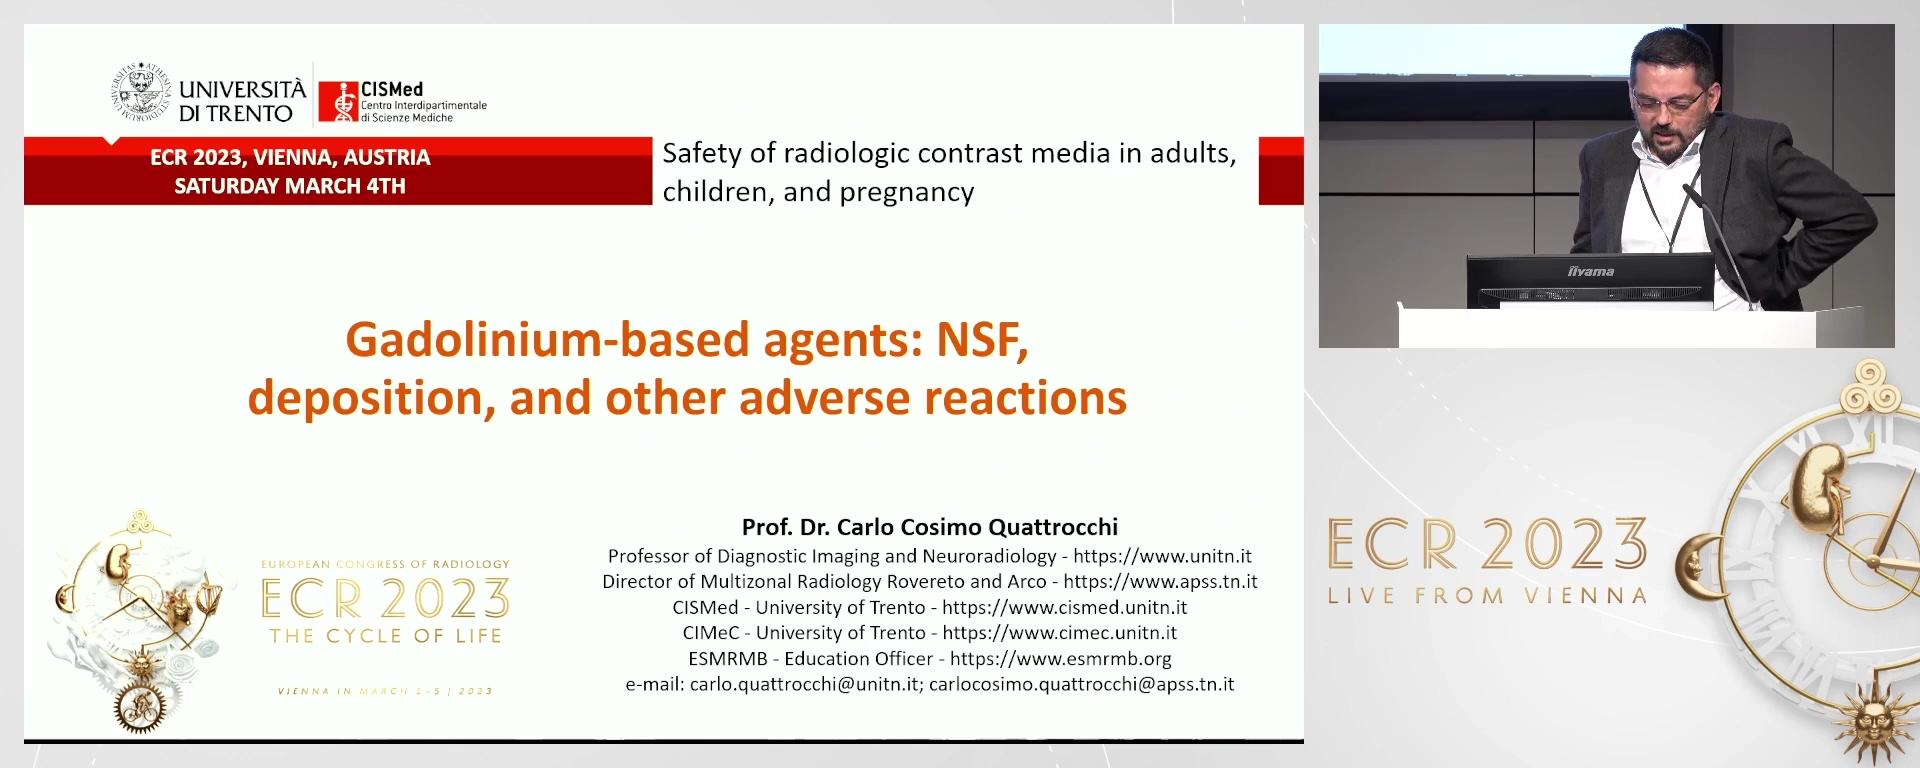 Gadolinium-based agents: NSF, deposition, and other adverse reactions